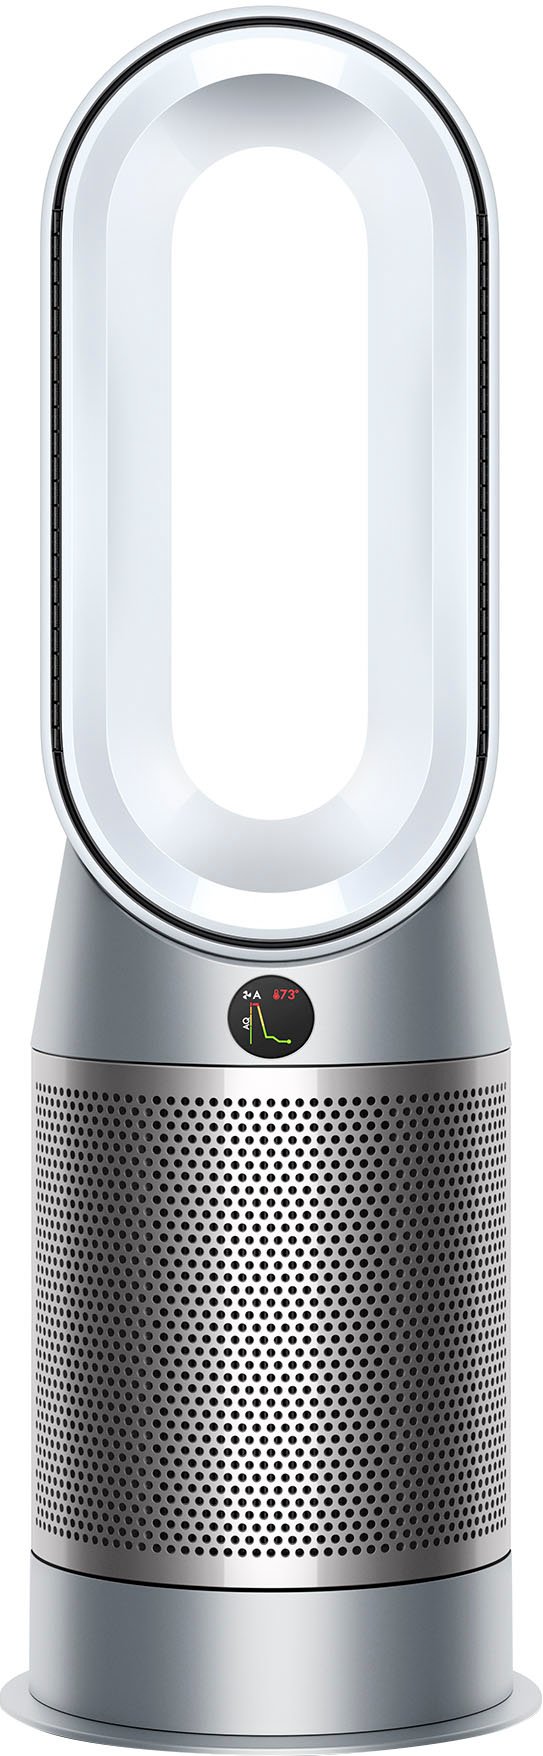 Dyson Hot+Cool Autoreact HP7A Air Purifier White/Nickel 419896-01 - $379.99 at Best Buy